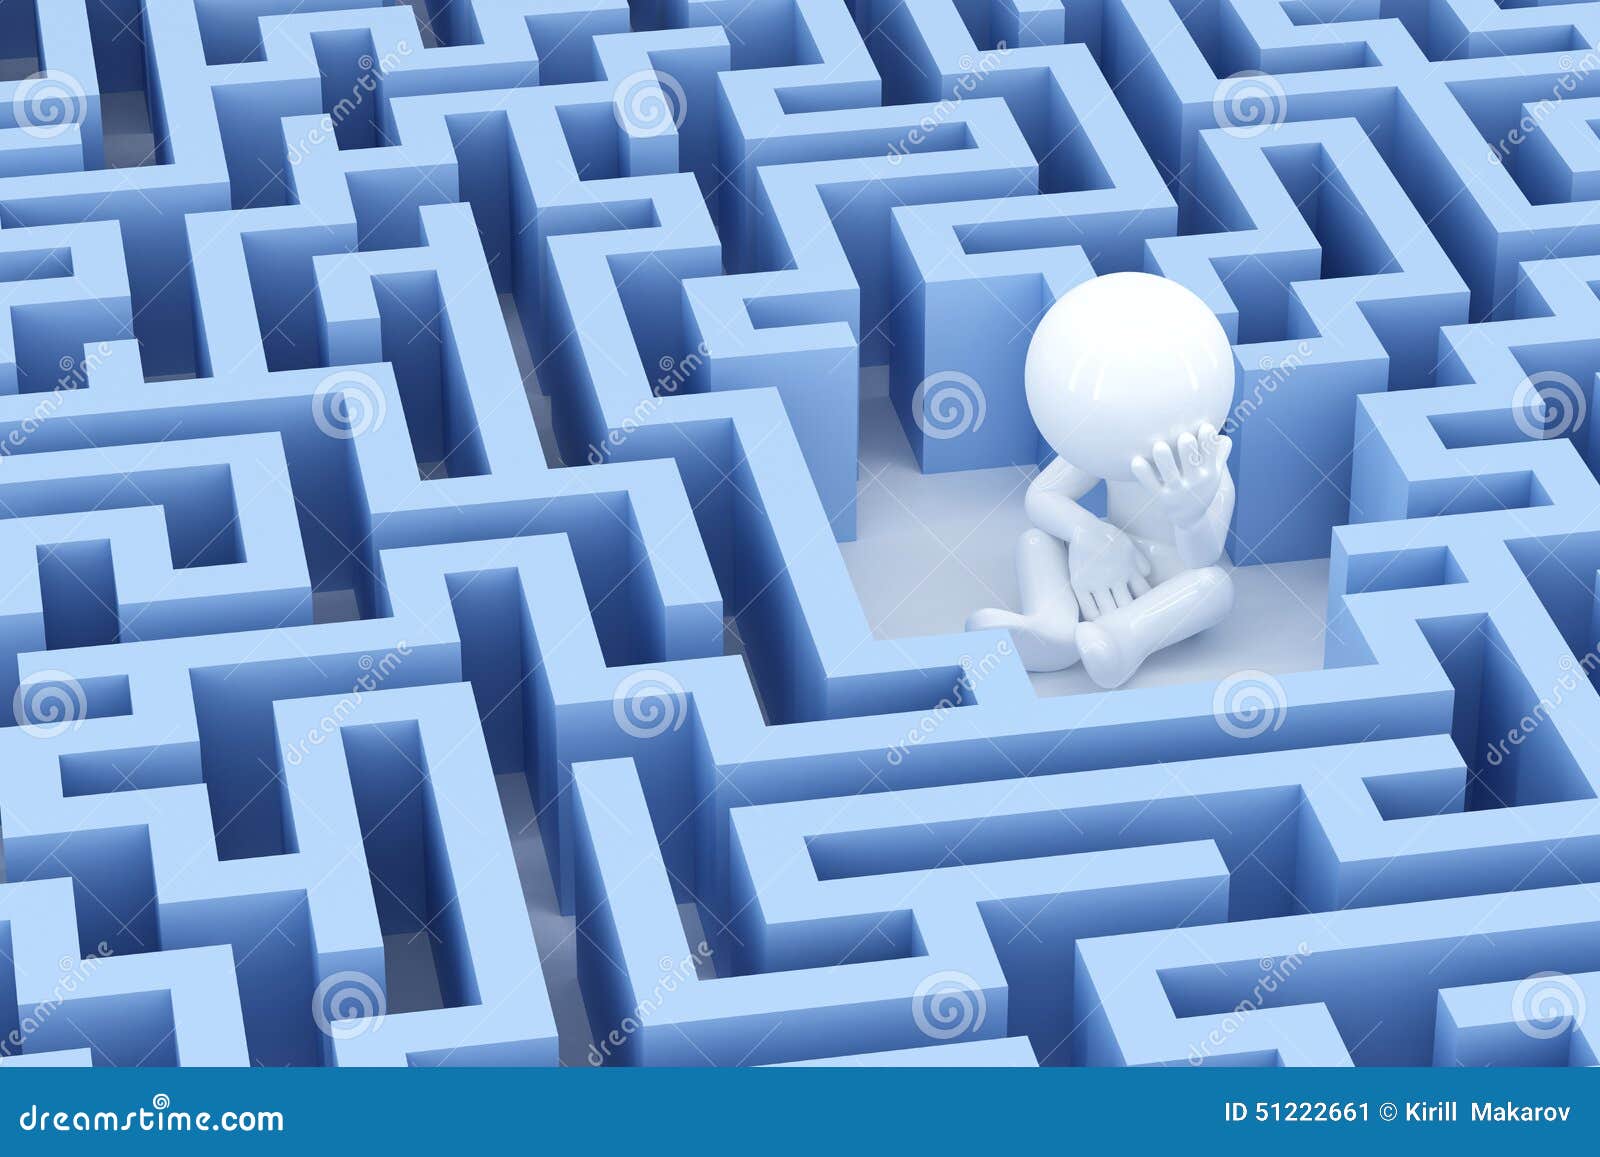 lost and sad man in center of the maze